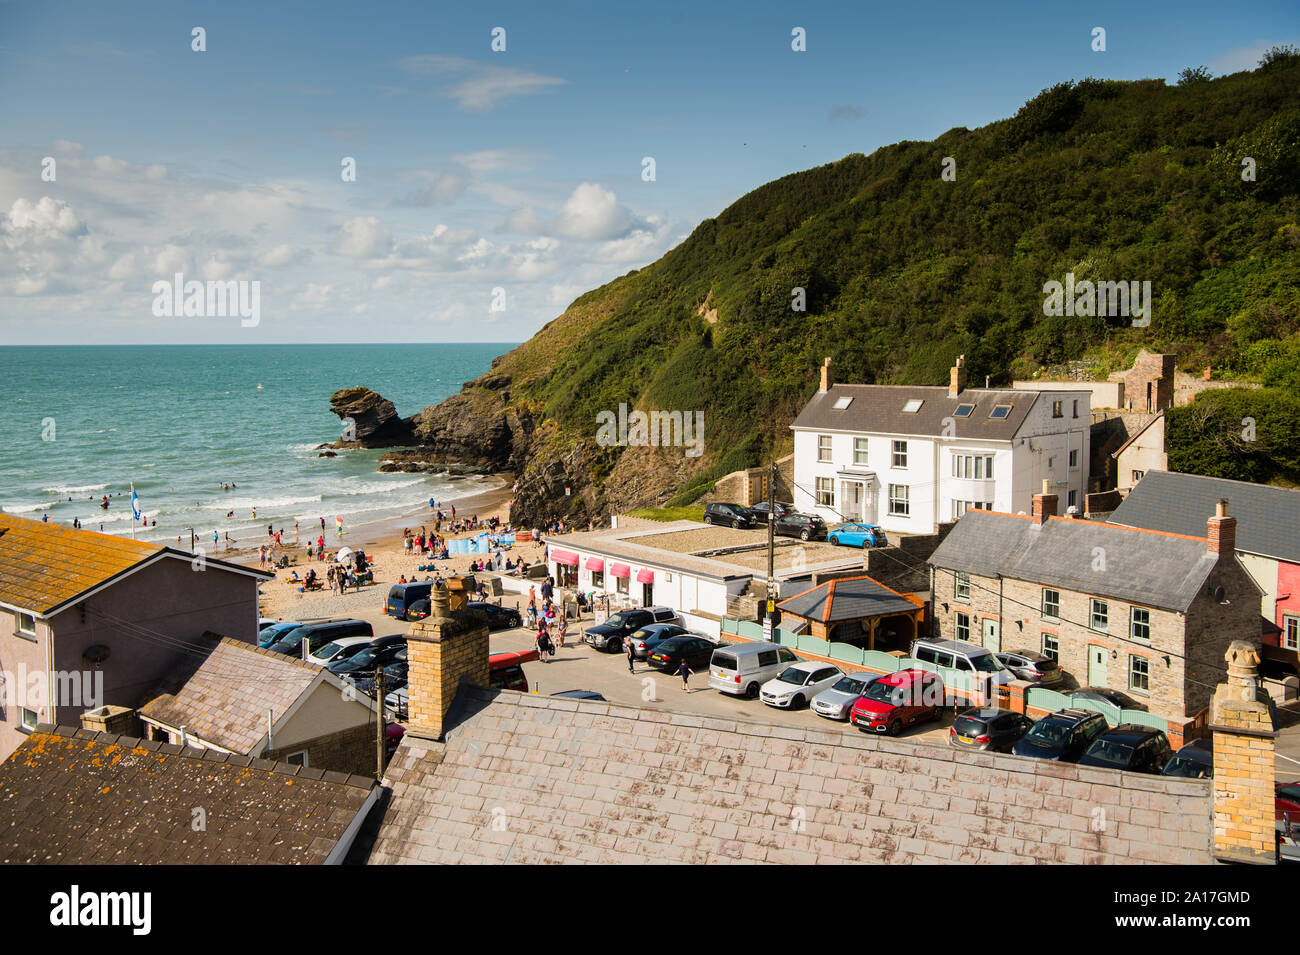 Llangrannog , a village and a community in Ceredigion, Wales, 6 miles southwest of New Quay. It lies in the narrow valley of the River Hawen, which falls as a waterfall near the middle of the village. Llangrannog is on the Wales Coast Path. Summer afternoon, August 2019 Stock Photo